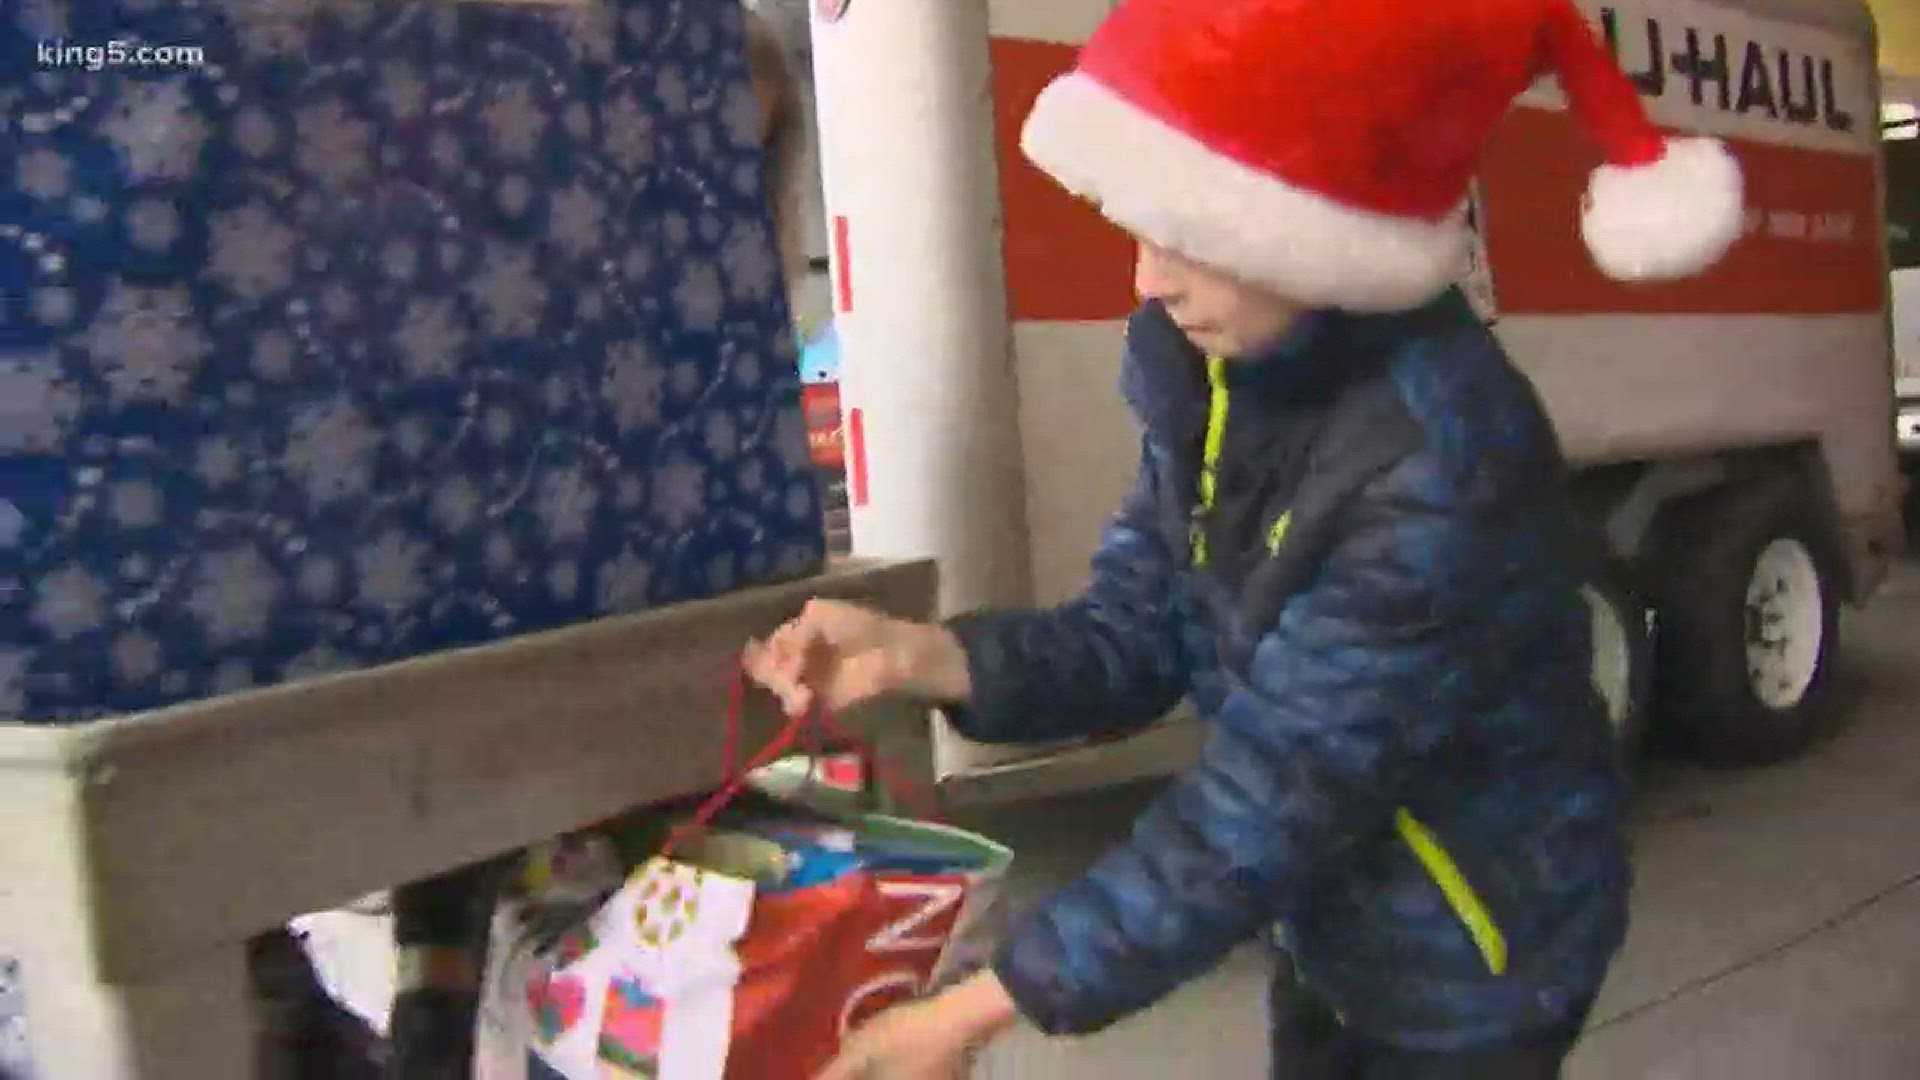 KING 5 Photojournalist Tom Tedford shows us a boy with a lot of holiday spirit.